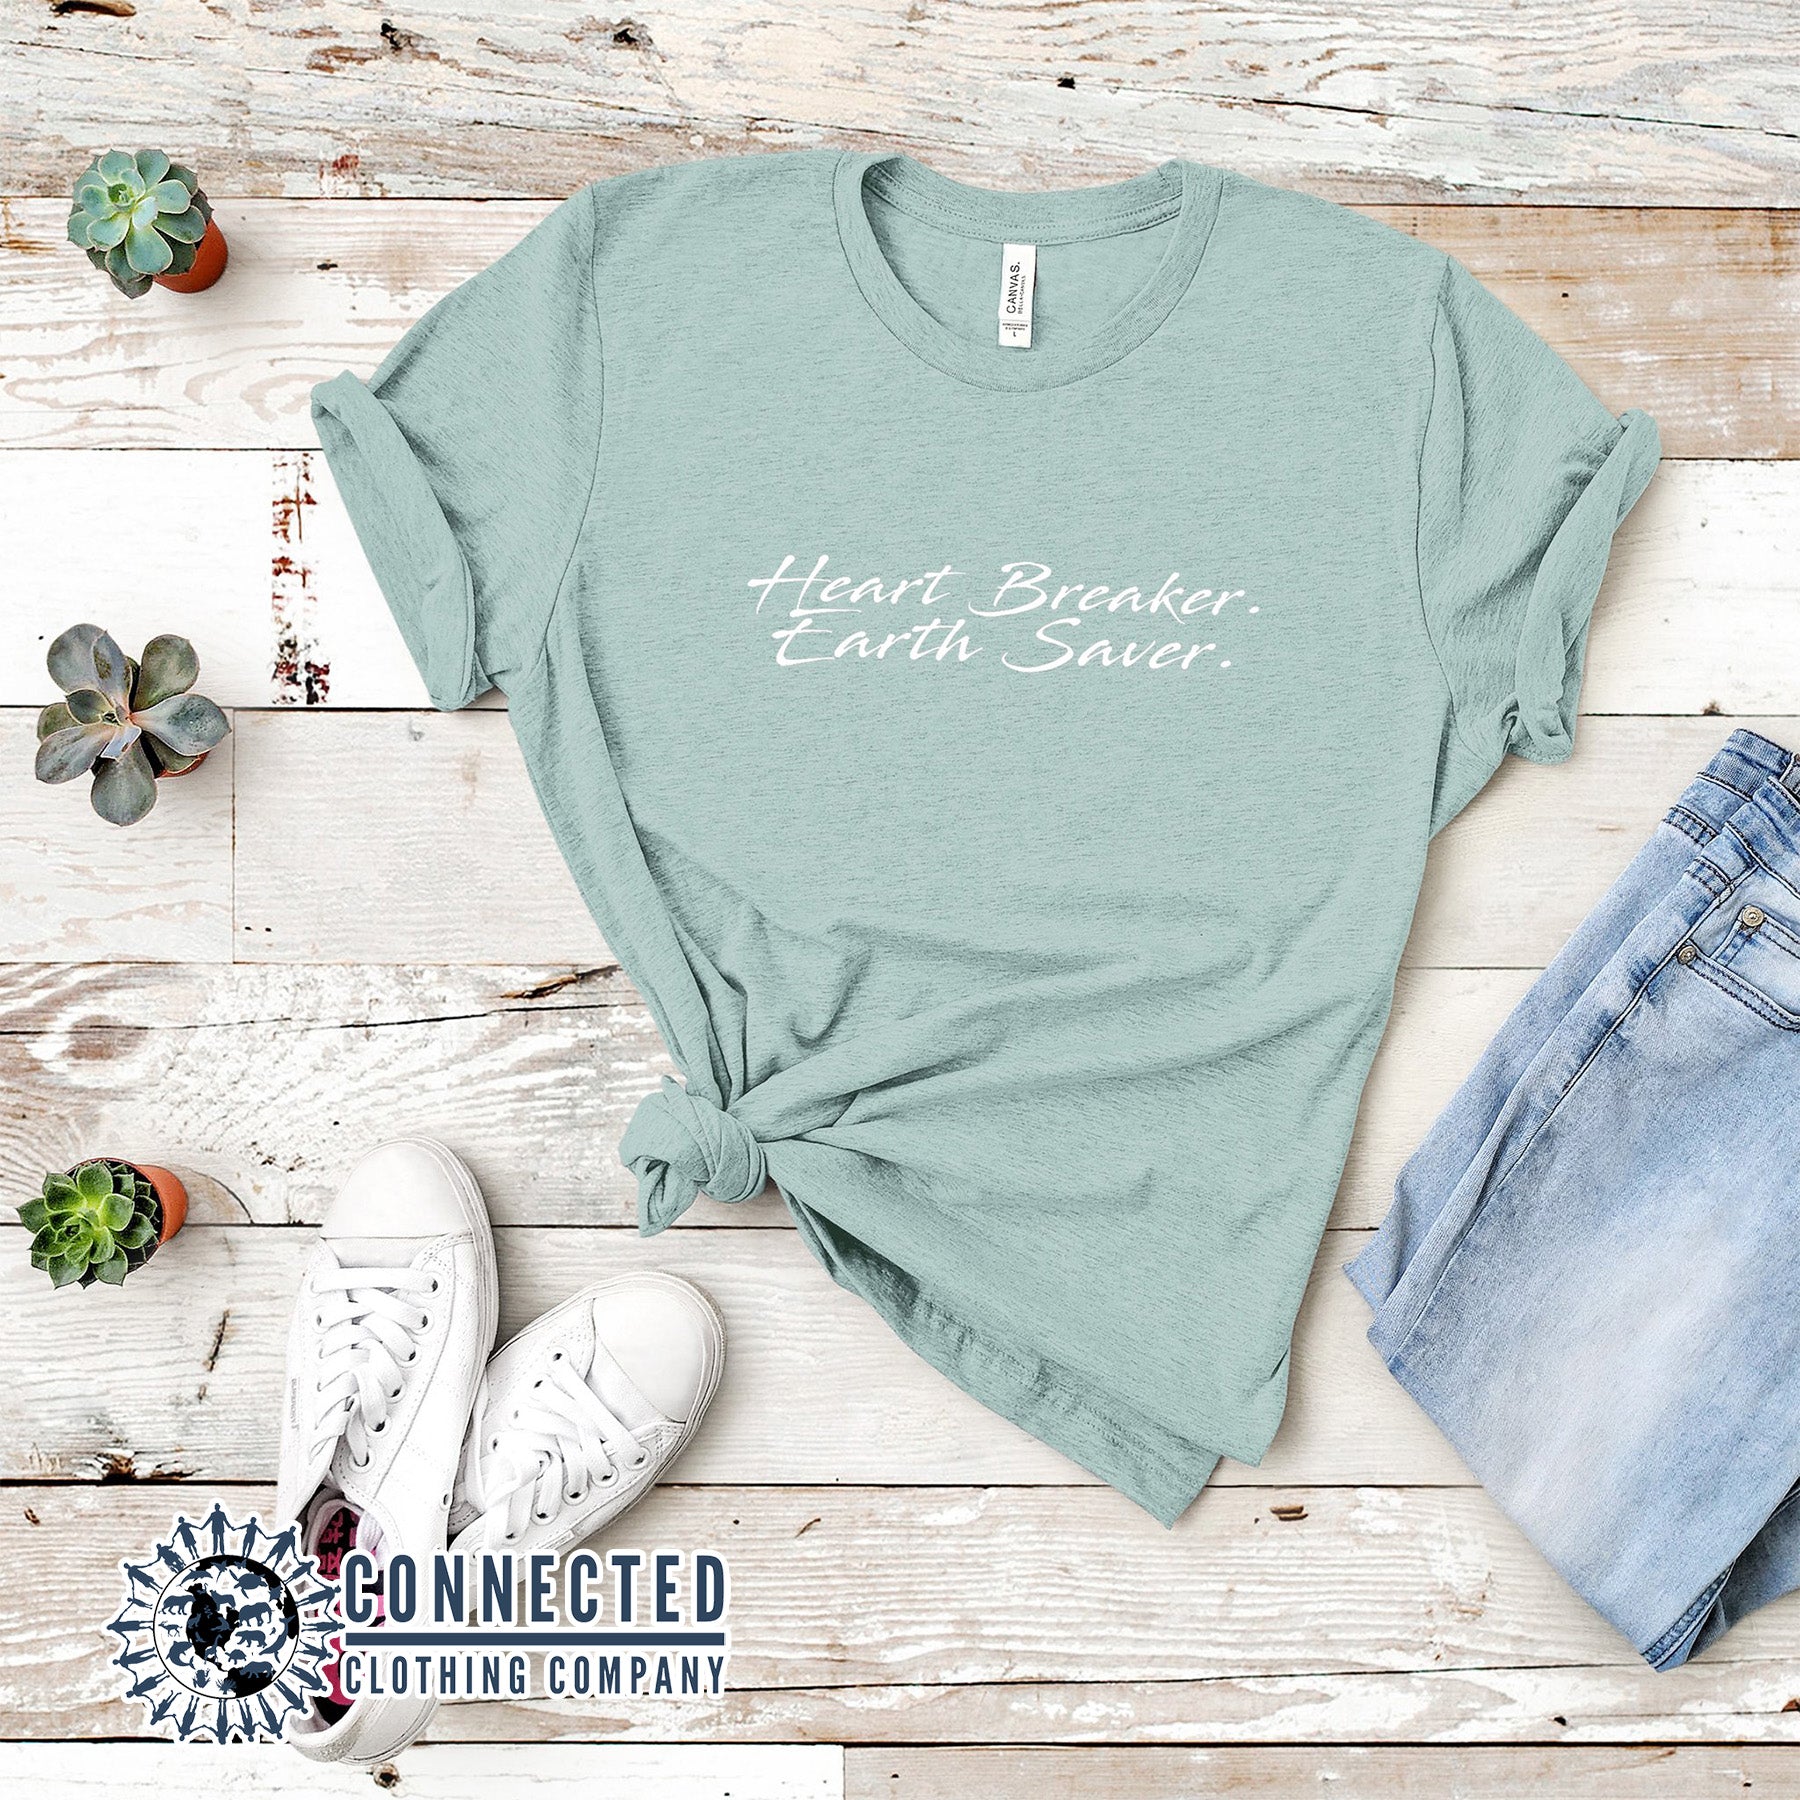 Heather Prism Dusty Blue Heart Breaker. Earth Saver. Short-Sleeve Tee - Connected Clothing Company - Ethically and Sustainably Made - 10% of profits donated to ocean conservation